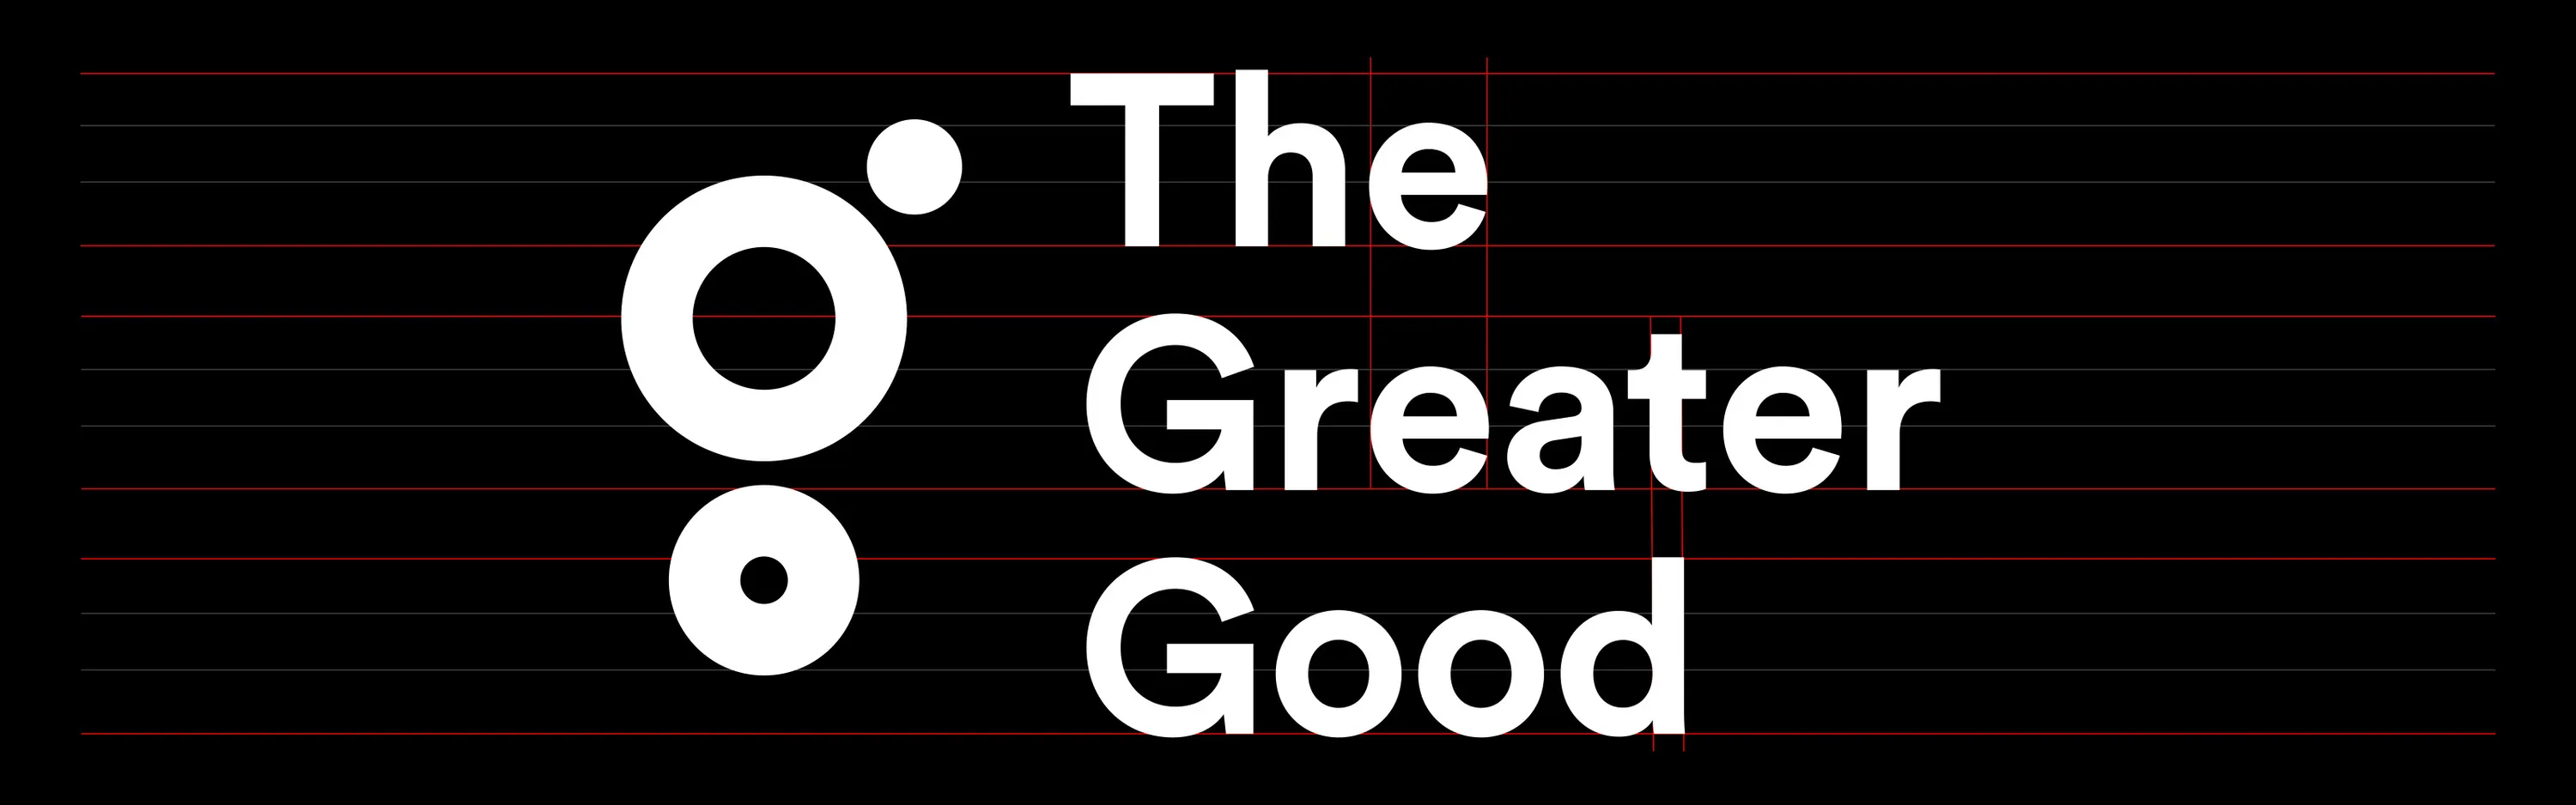 Silver Room Greater Good typography design